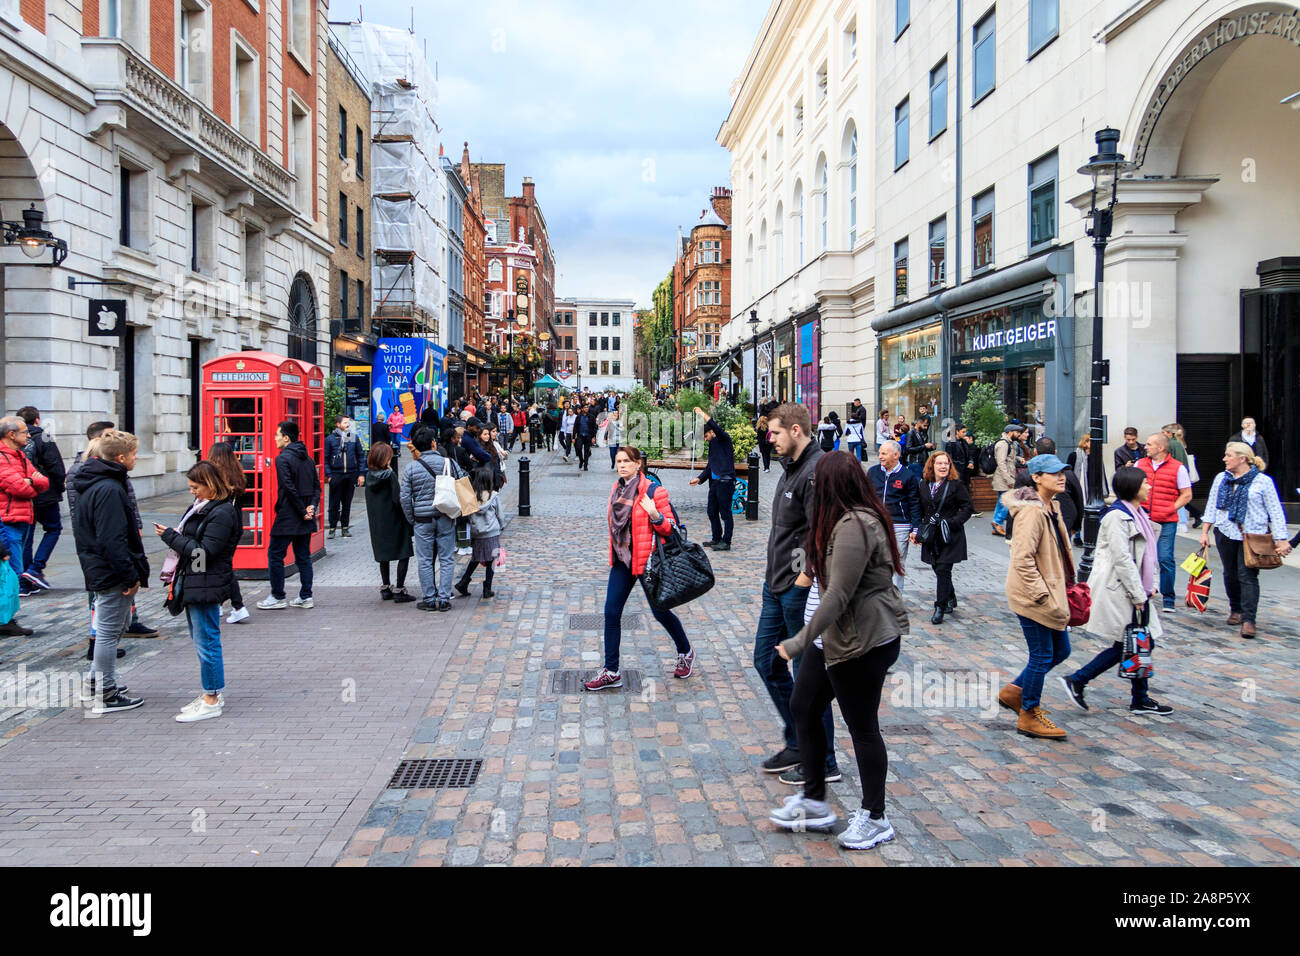 Shoppers and tourists in James Street, Covent Garden, London, UK Stock Photo